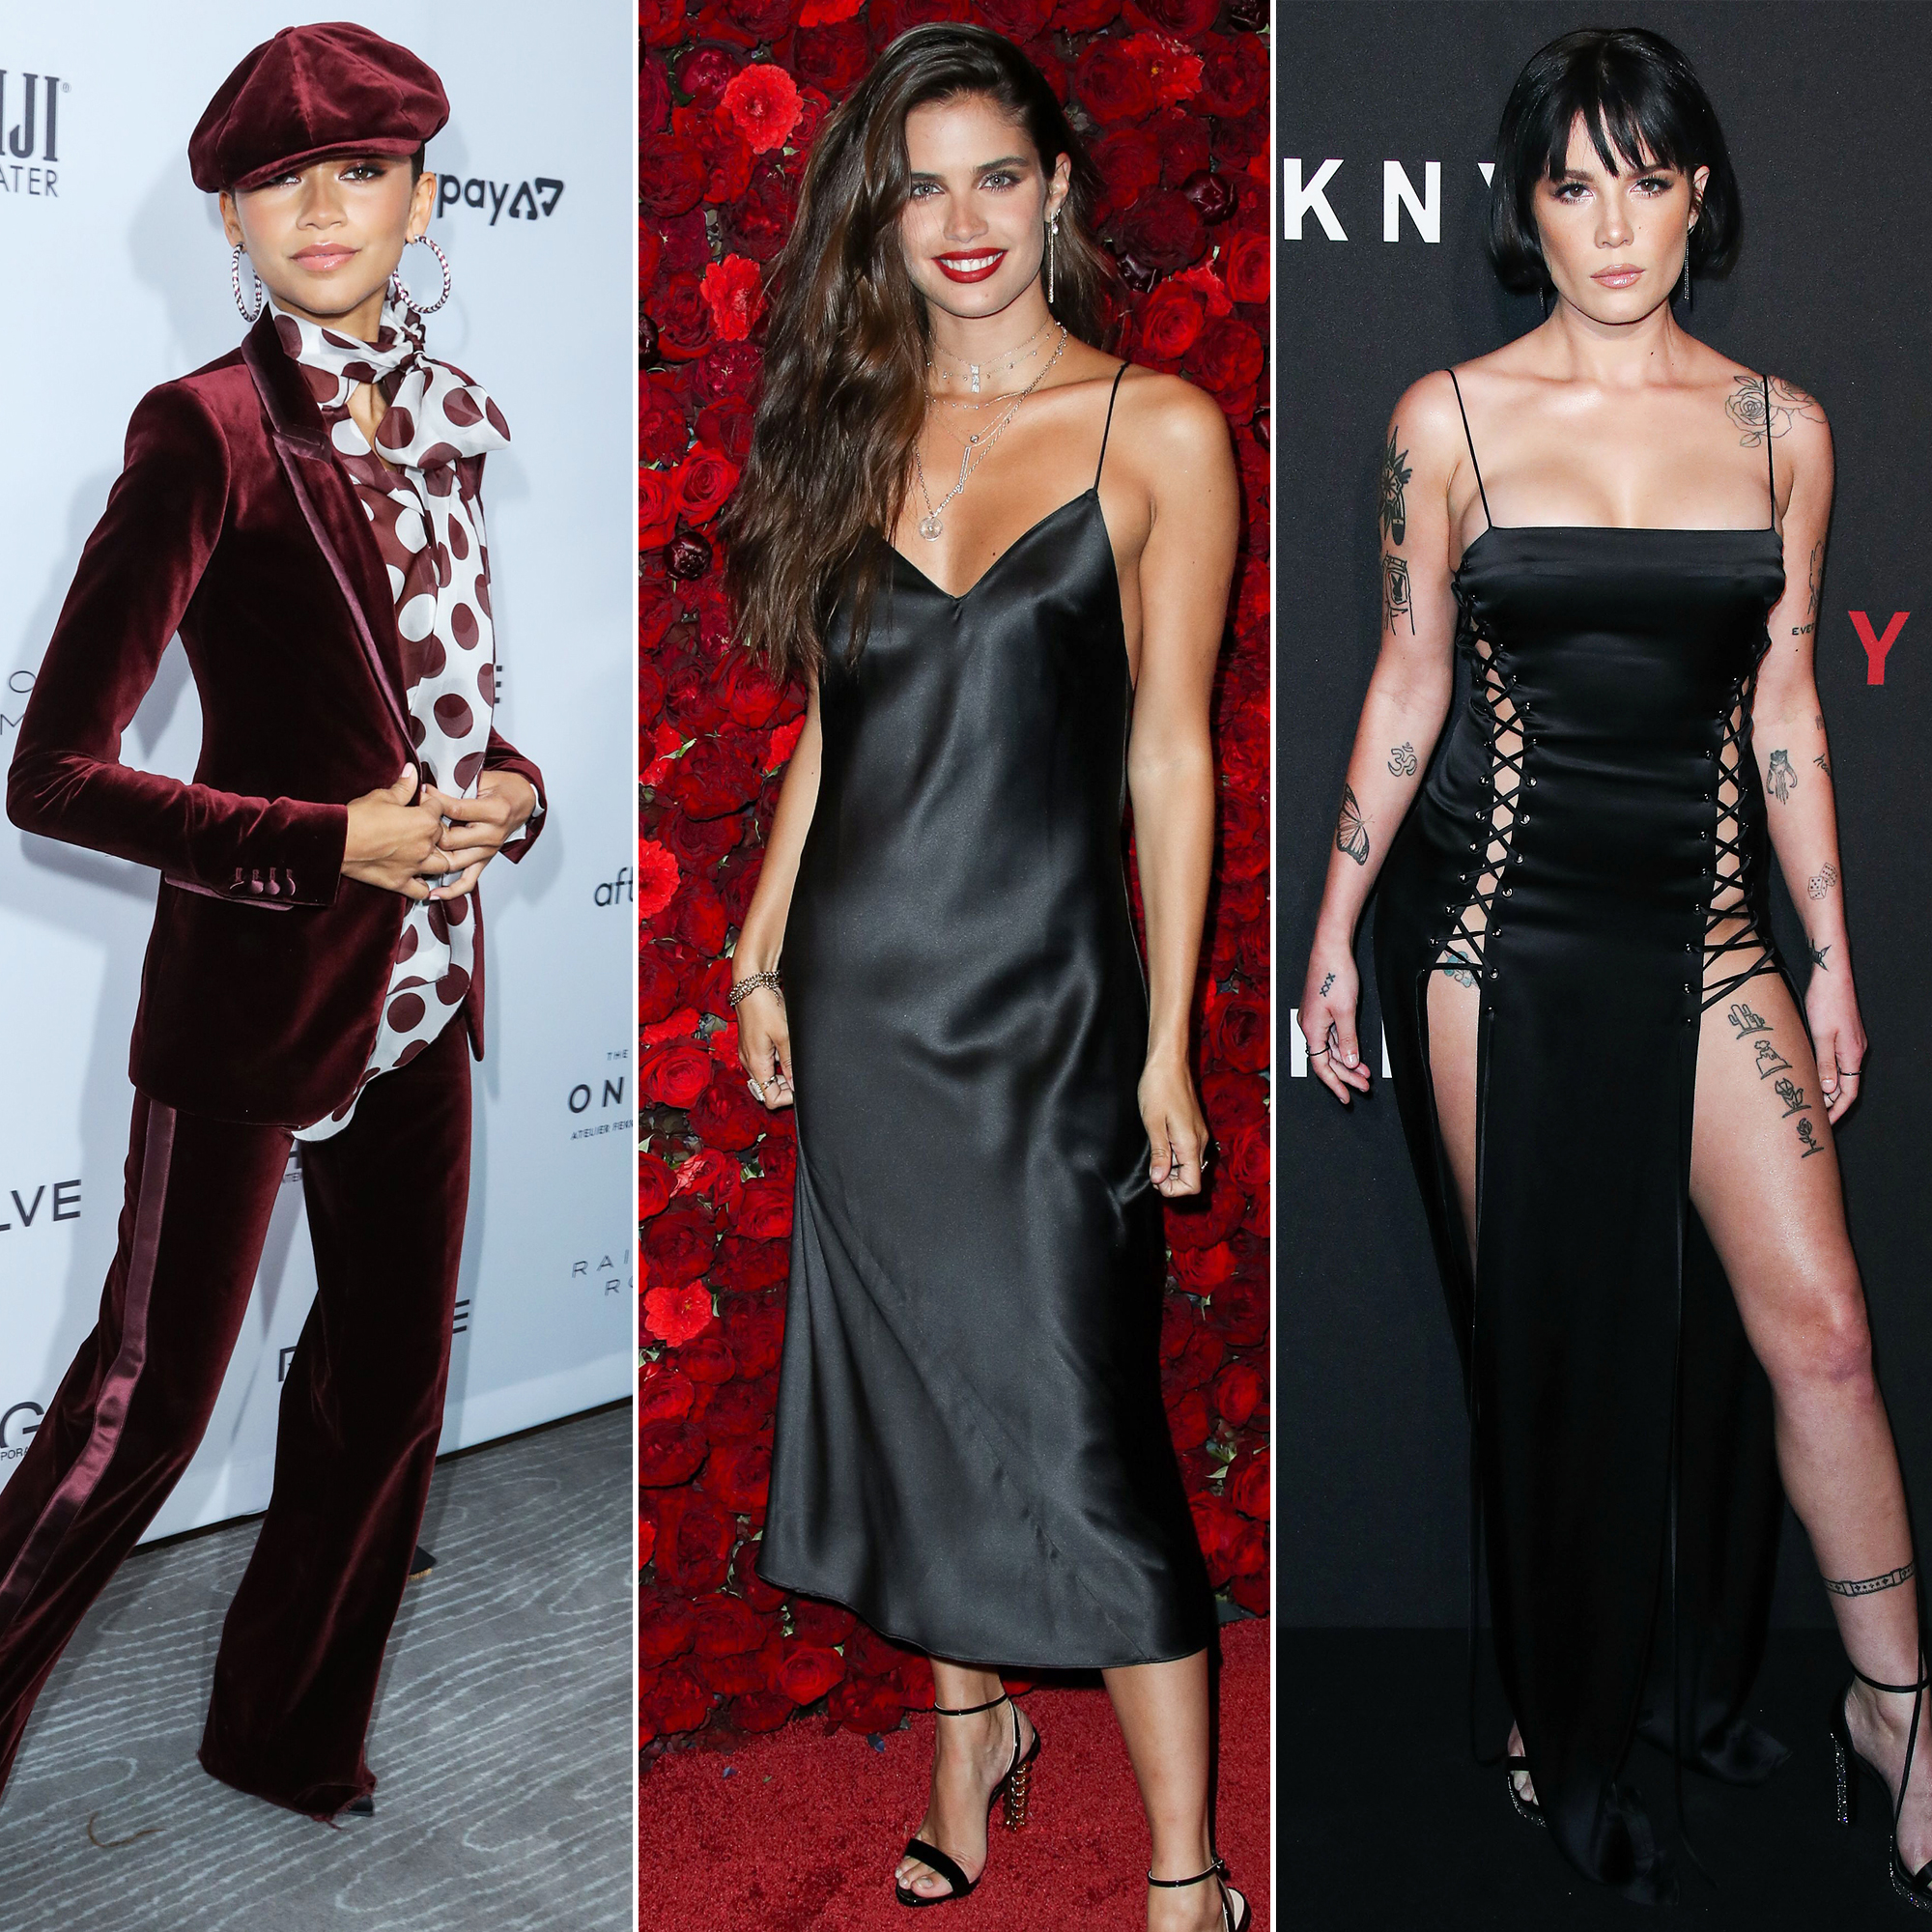 Zendaya - The fashionista - Image 6 from Best Dressed of the Week: Chanel  Iman's Slinky Sheath